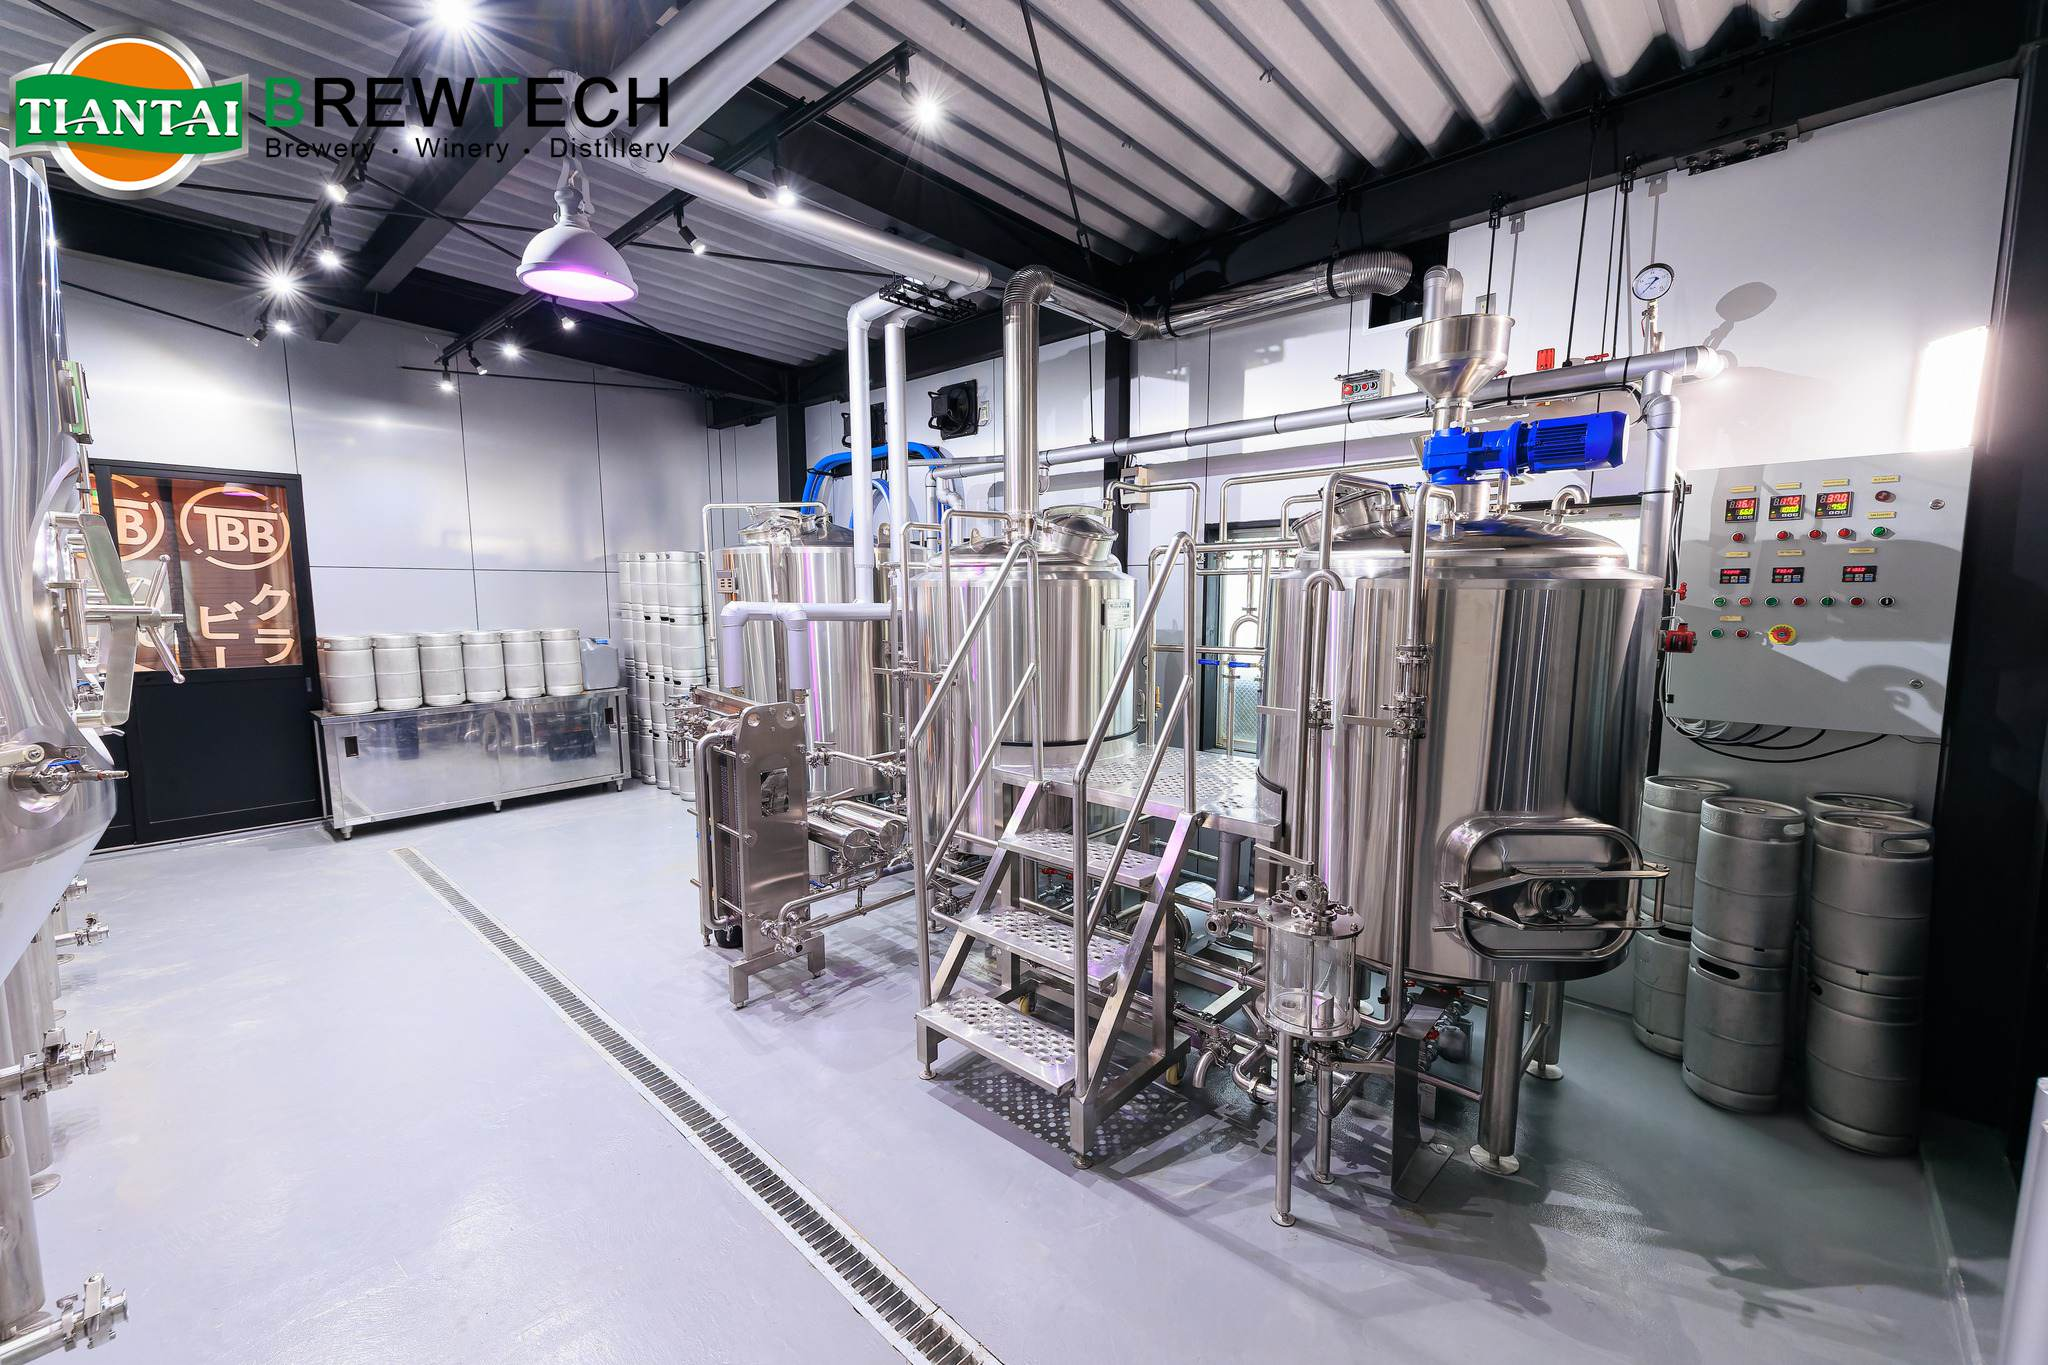 500L Two Vessel Brewhouse Project for Tall Boys Brewing in Japan